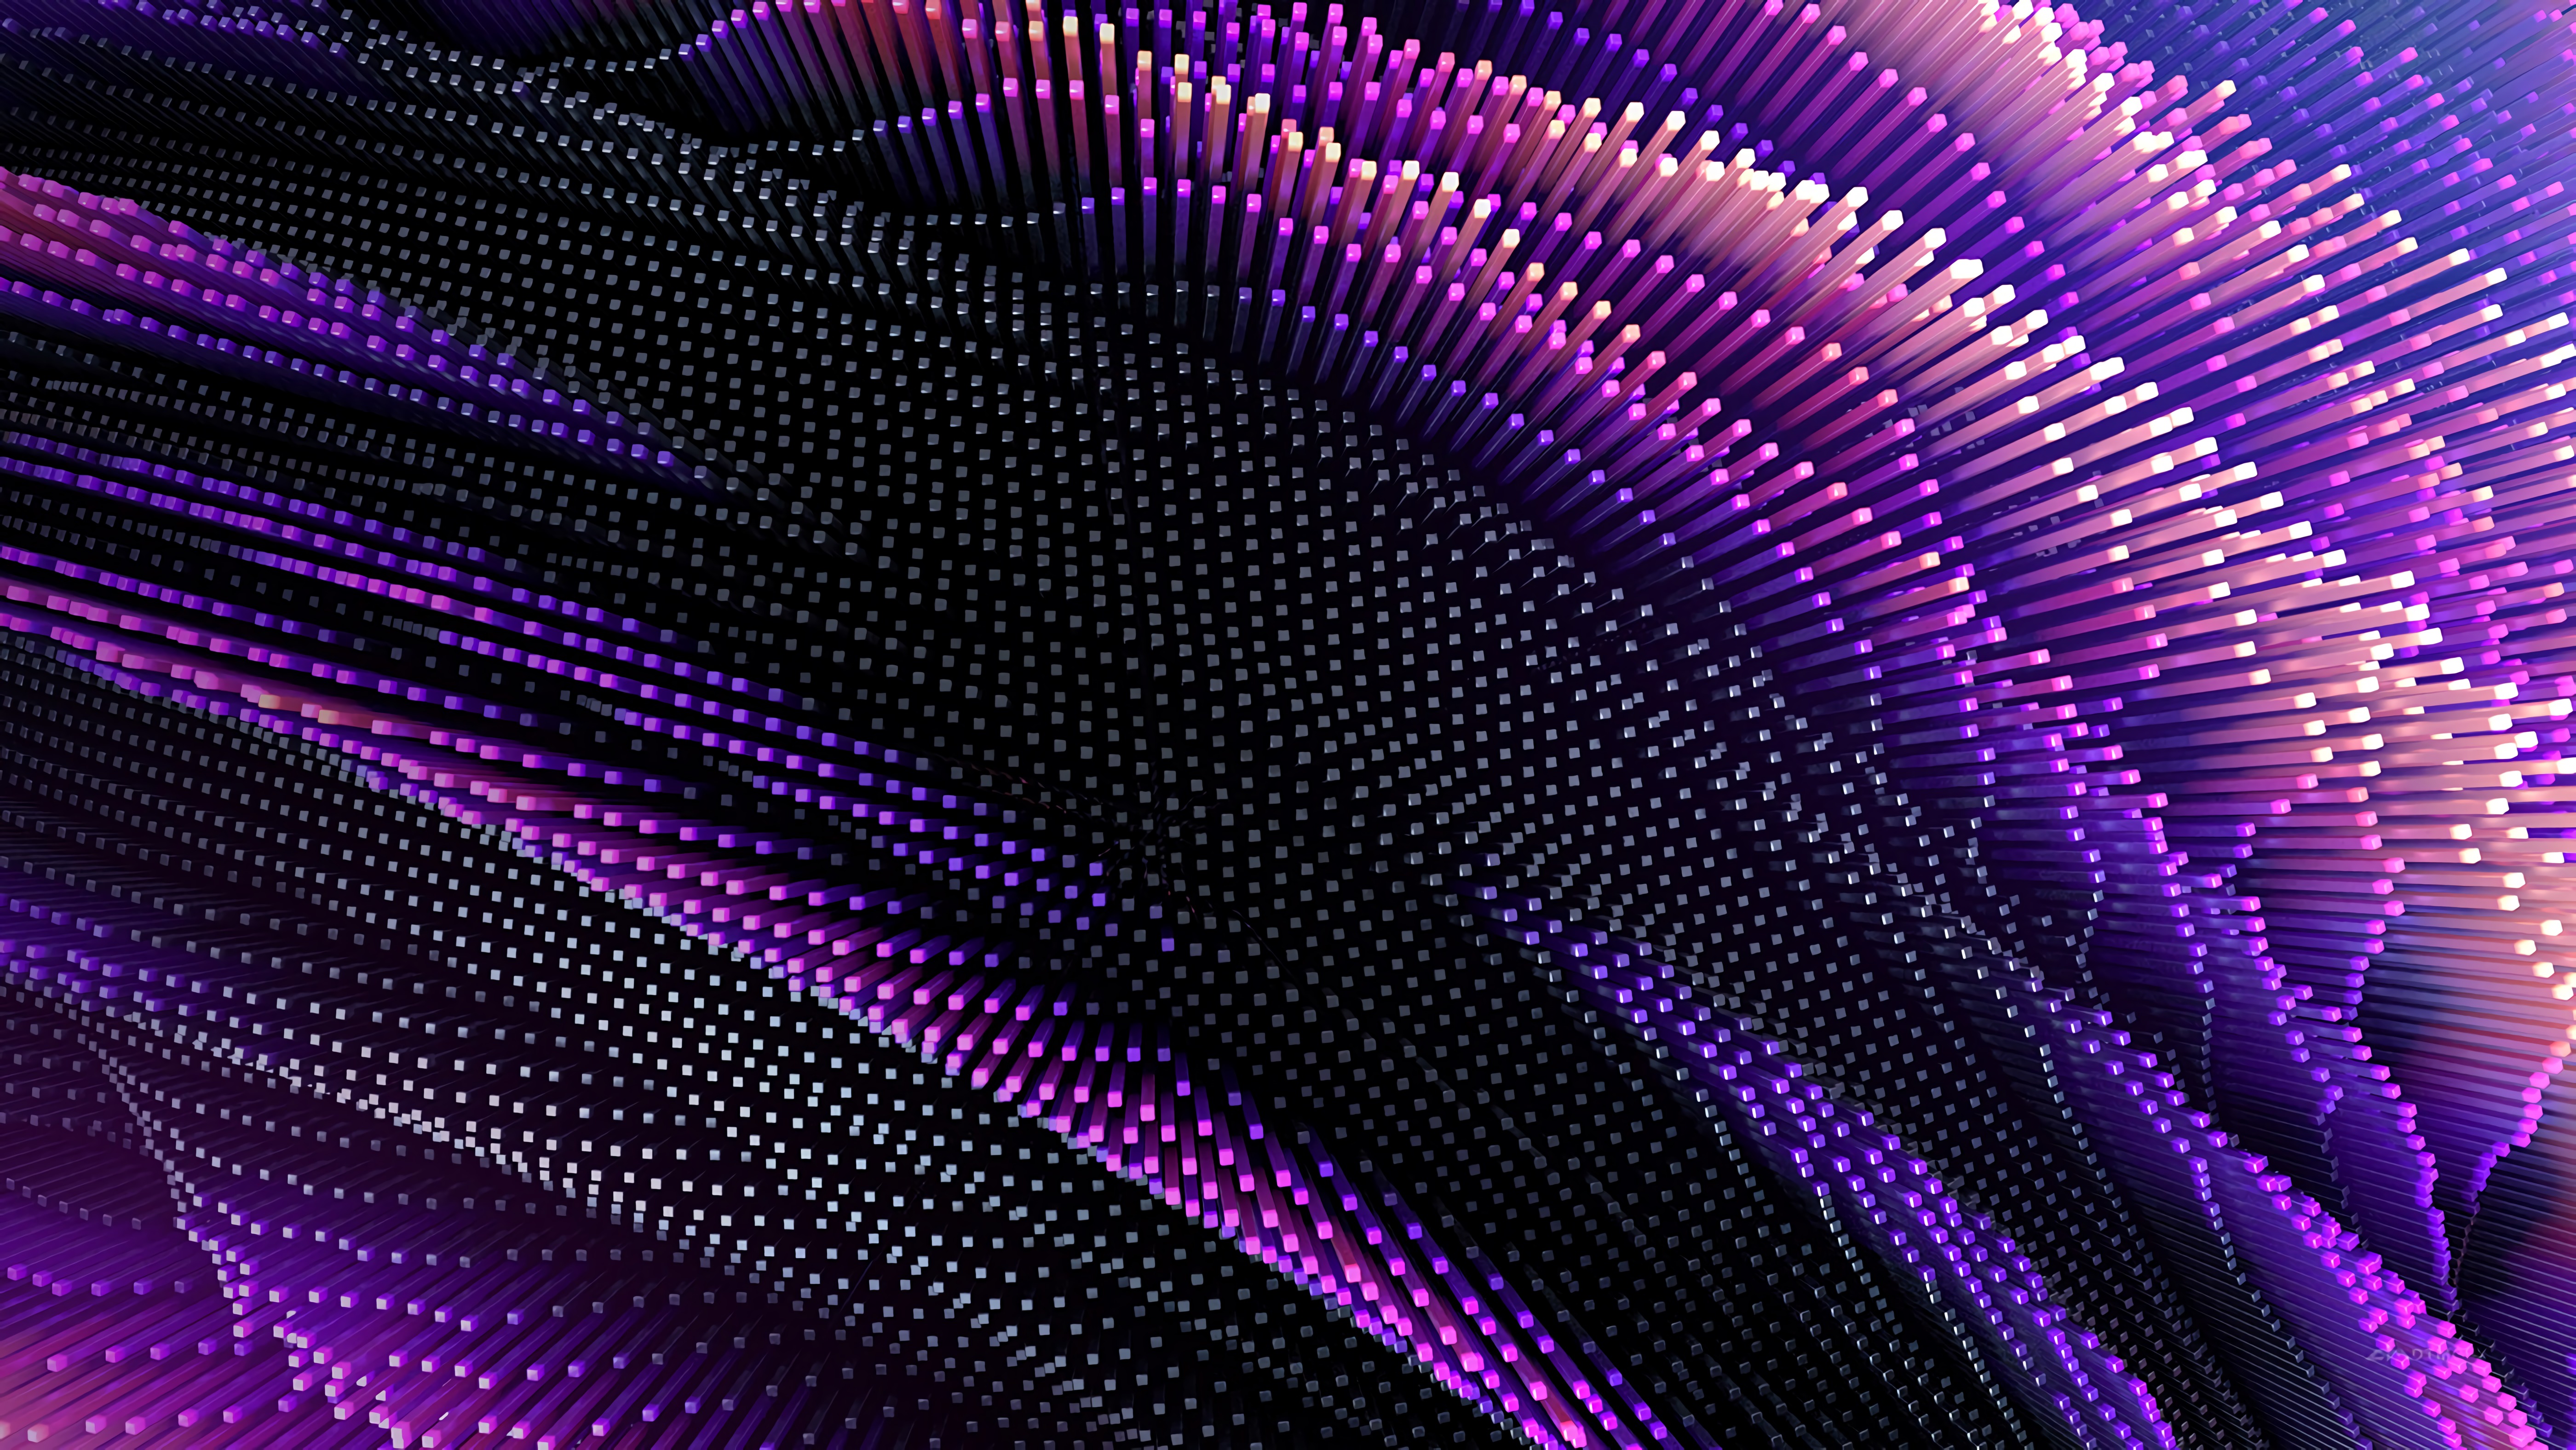 Phone Background Full HD forms, convex, lines, wavy